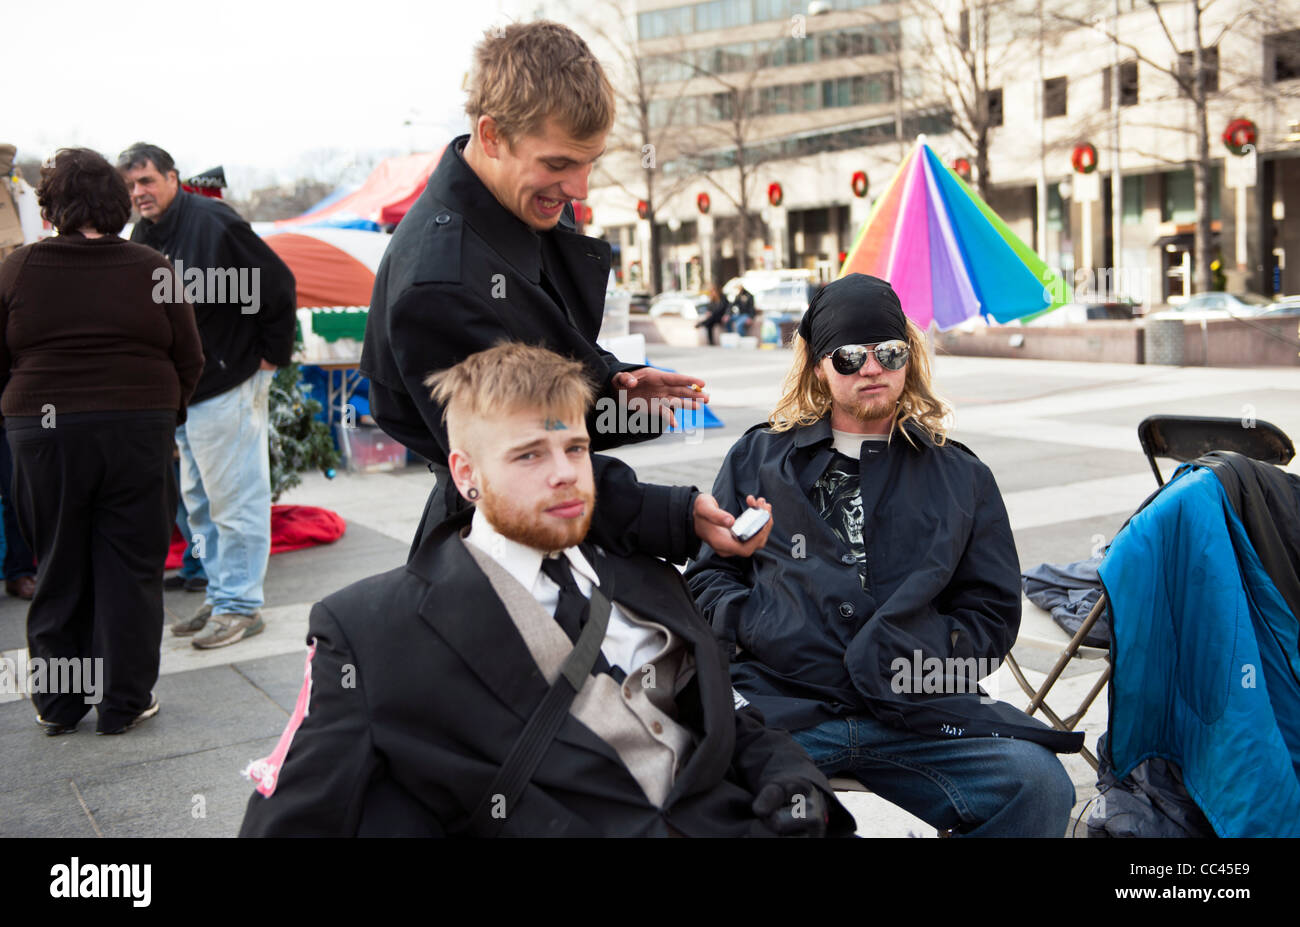 A few of the participants in the Occupy DC movement, picture taken on December 20th, 2011at Freedom Plaza in Washington DC. Stock Photo